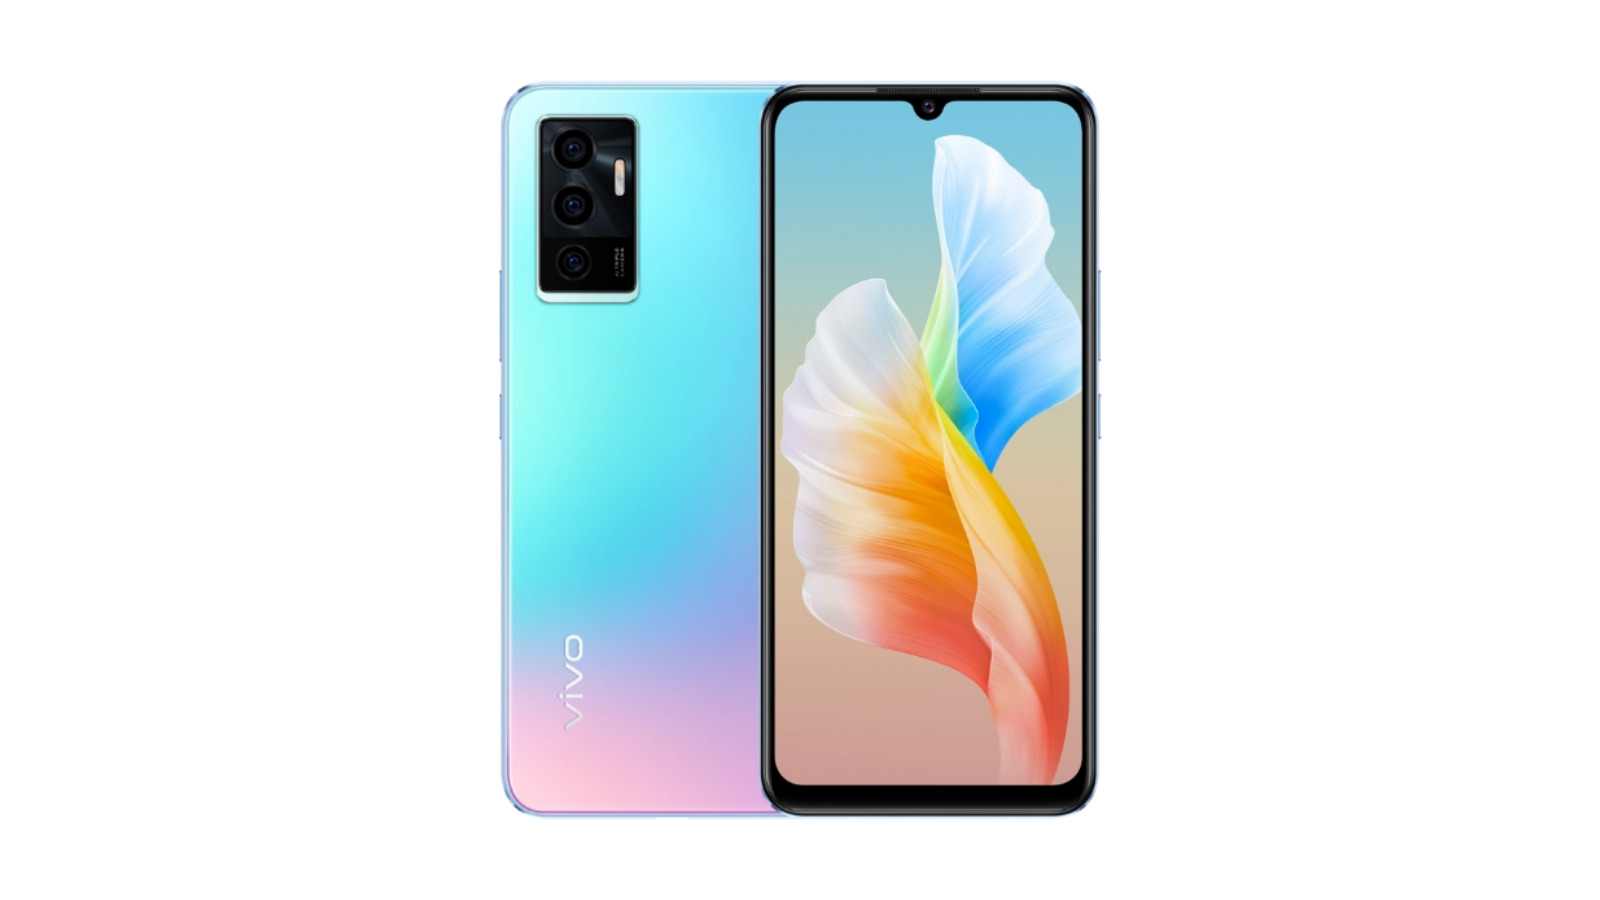 Vivo S10e with MediaTek Dimensity 900, 90Hz AMOLED display launched: Price, Specifications